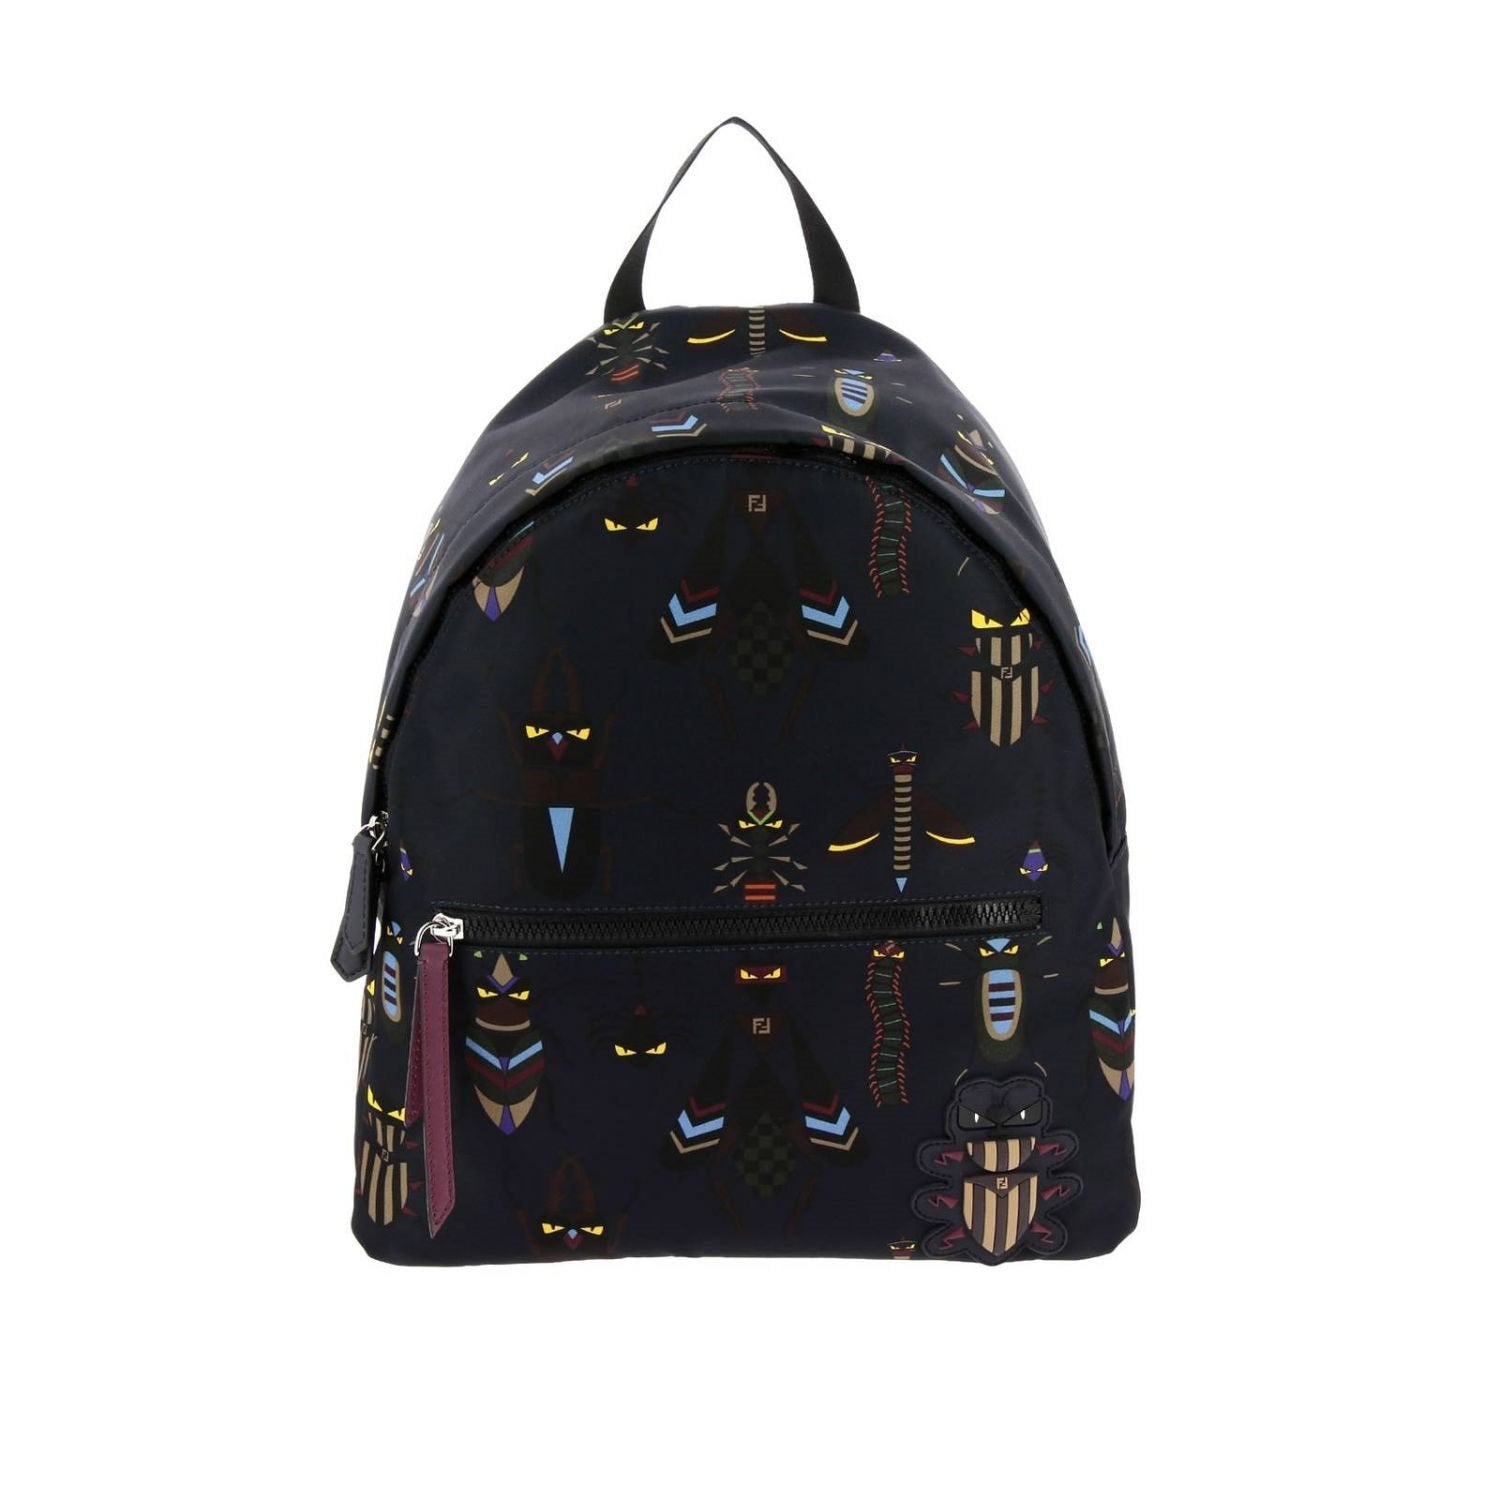 Fendi Bugs Backpack 7VZ043 at_Queen_Bee_of_Beverly_Hills